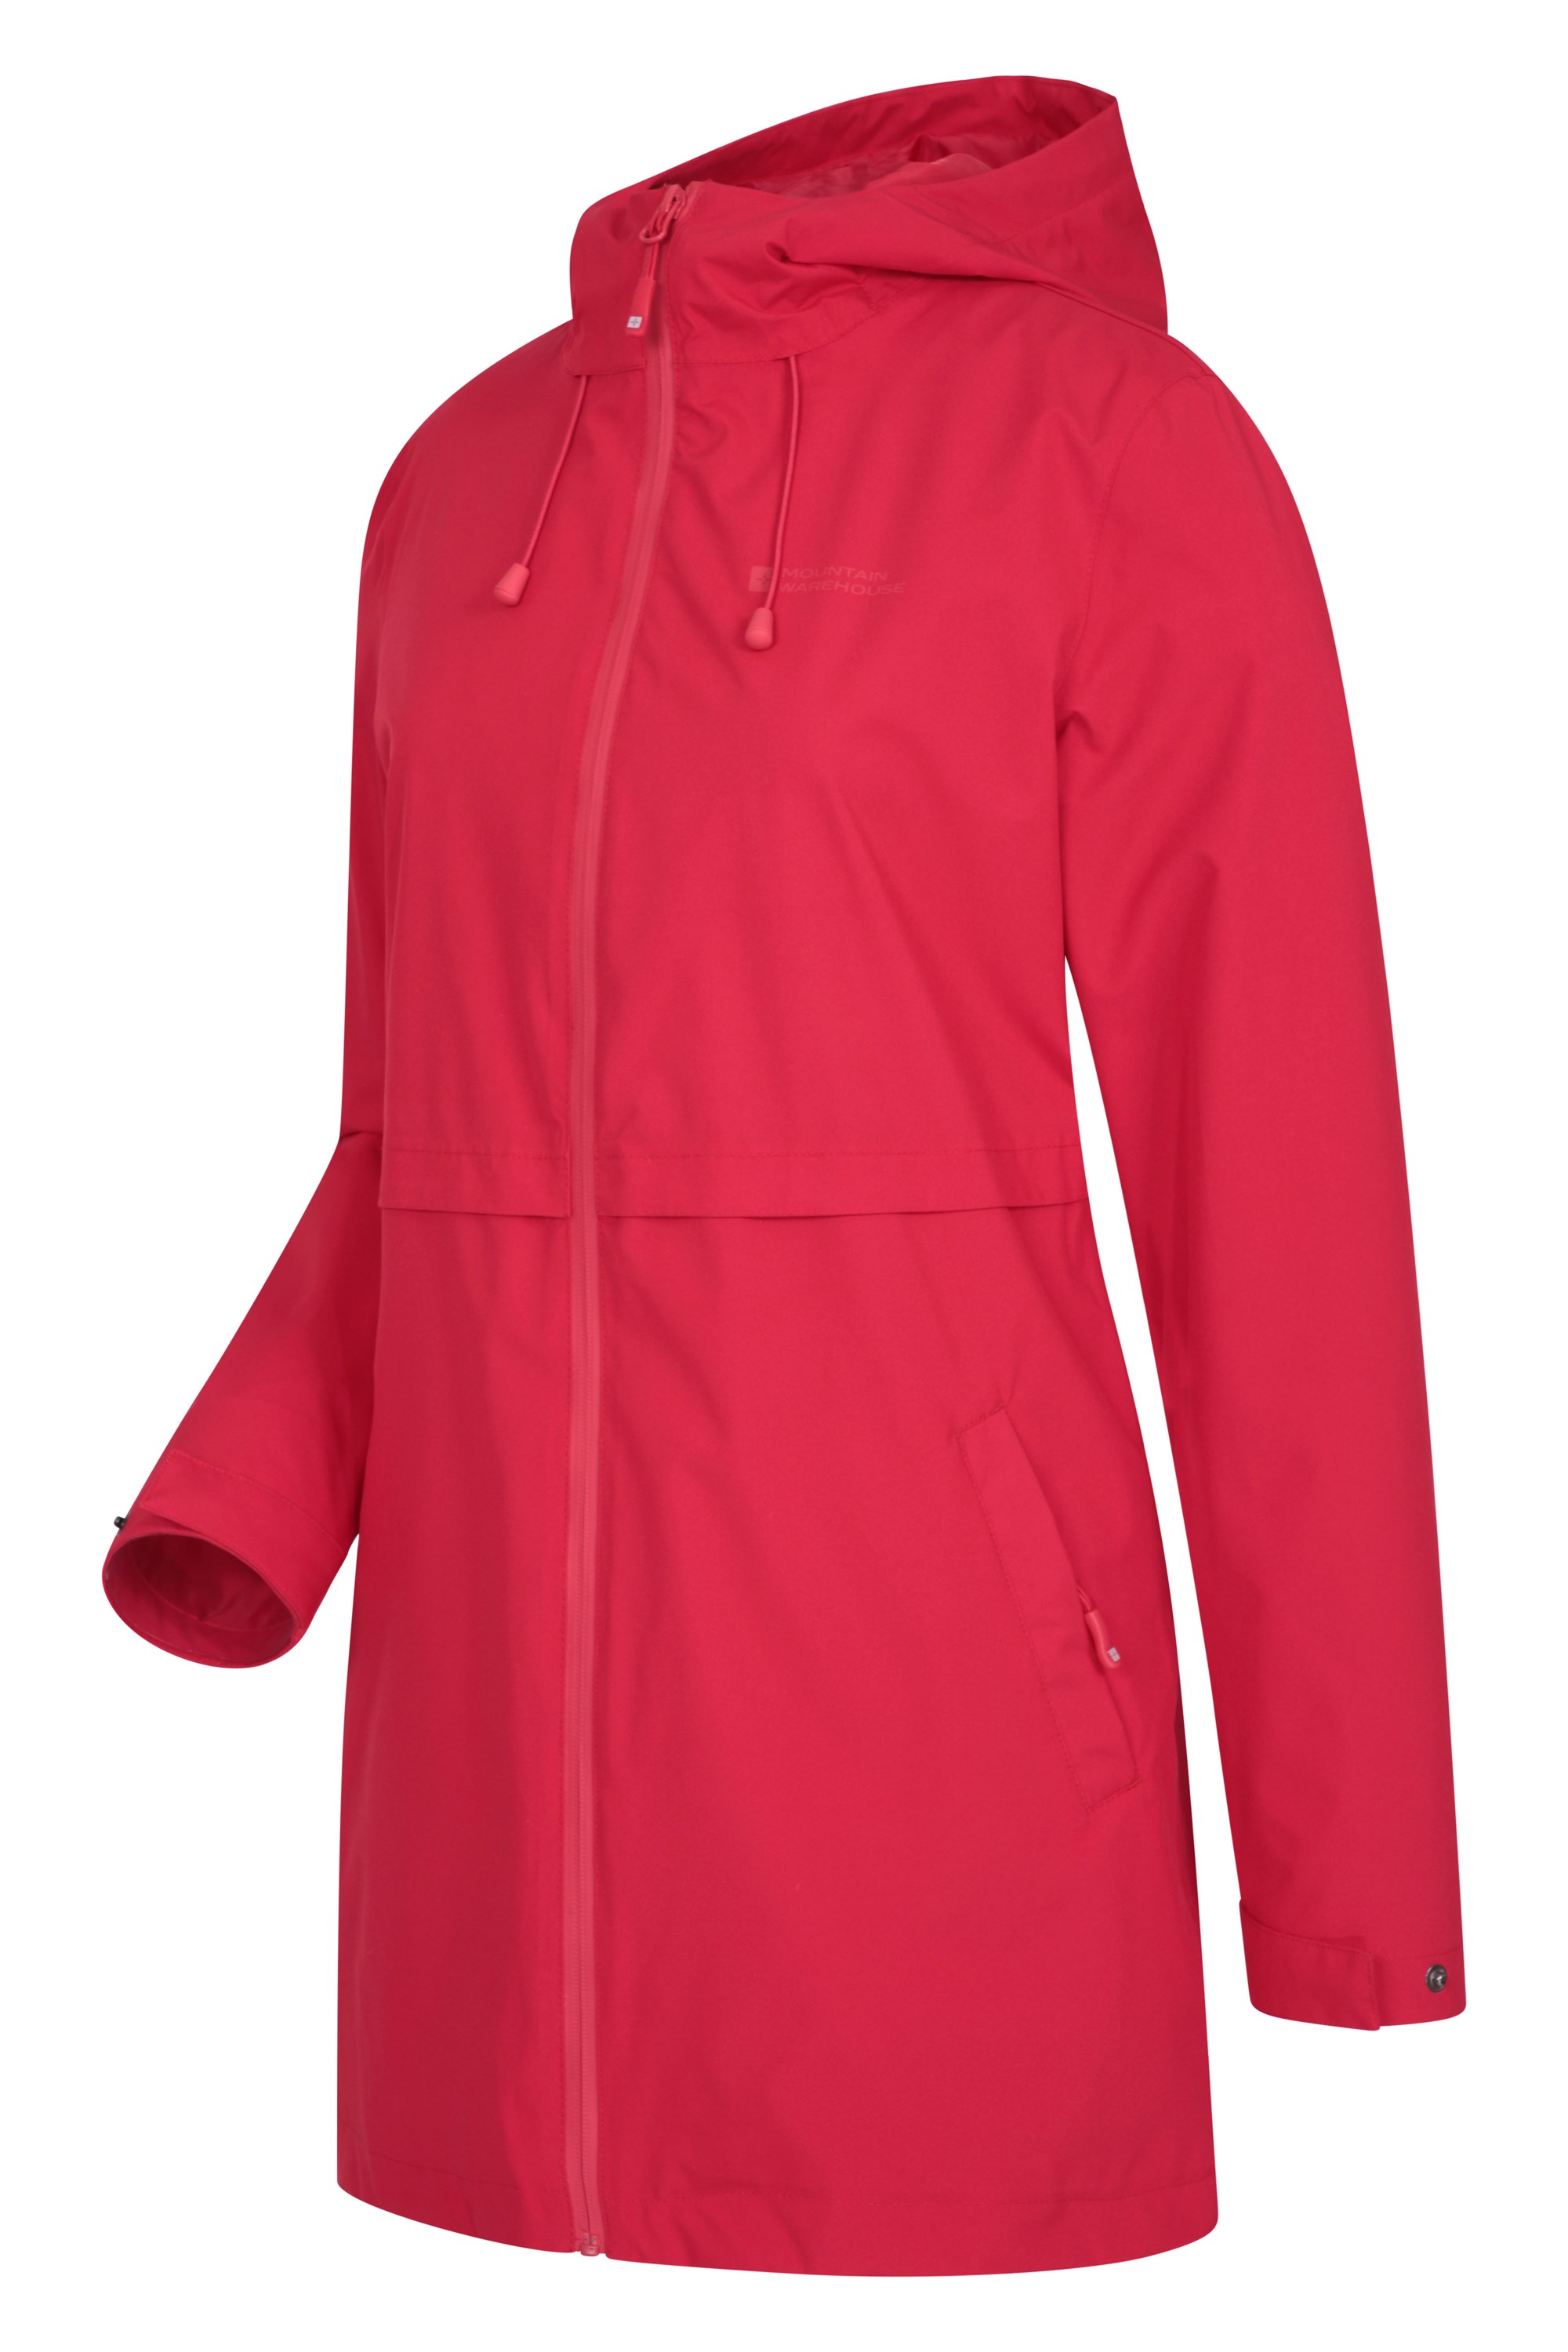 Mountain Warehouse Hilltop Womens Waterproof Jacket For Cycling Taped Seams Lightweight